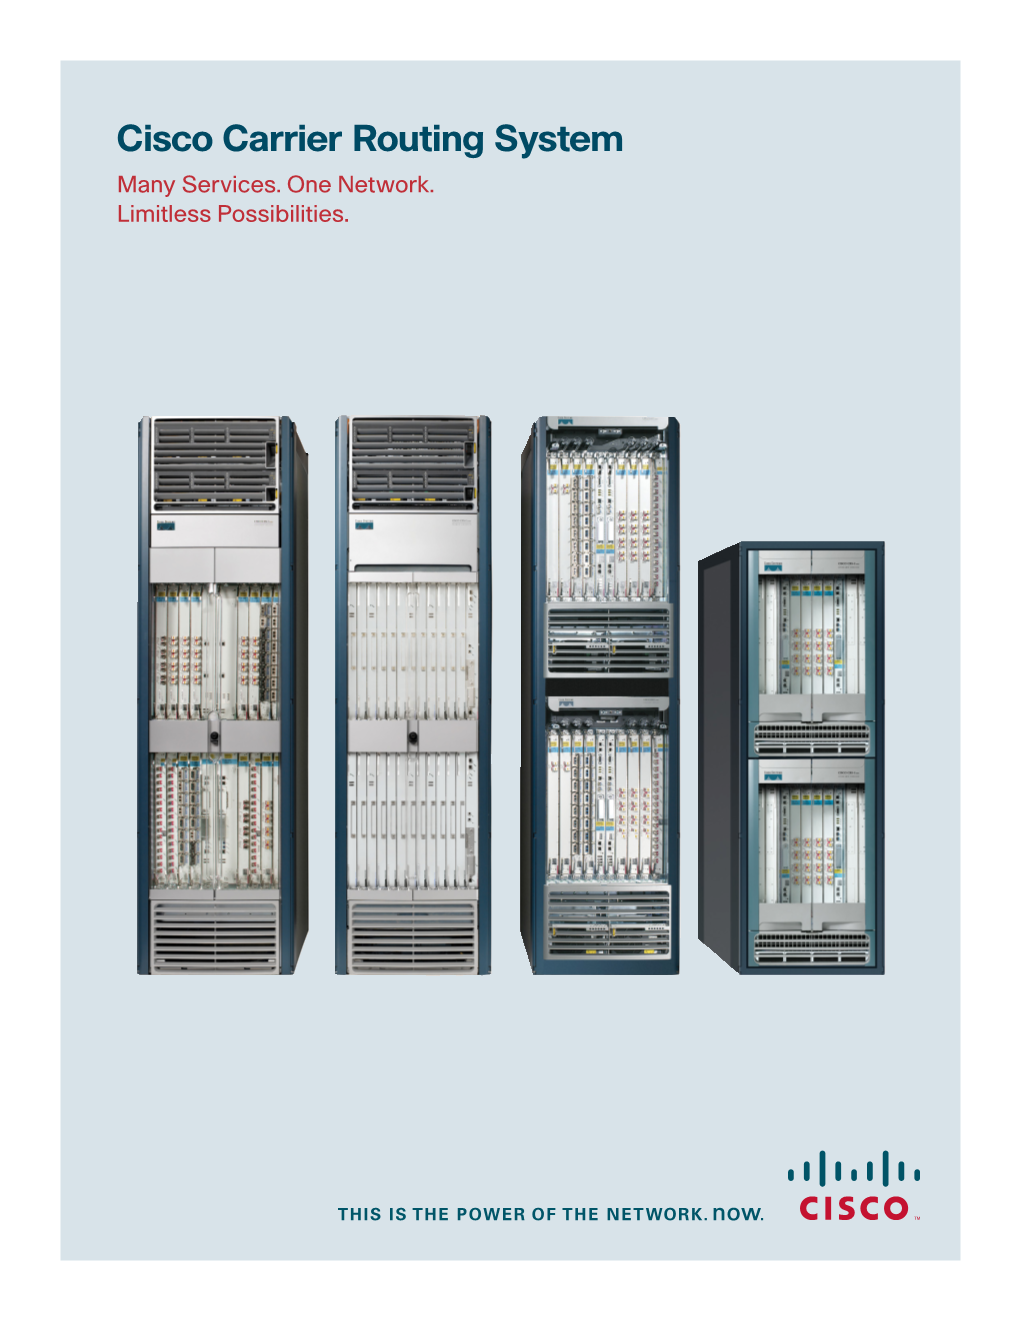 Cisco CRS-1 Carrier Routing System Foundation for Network and Service Convergence